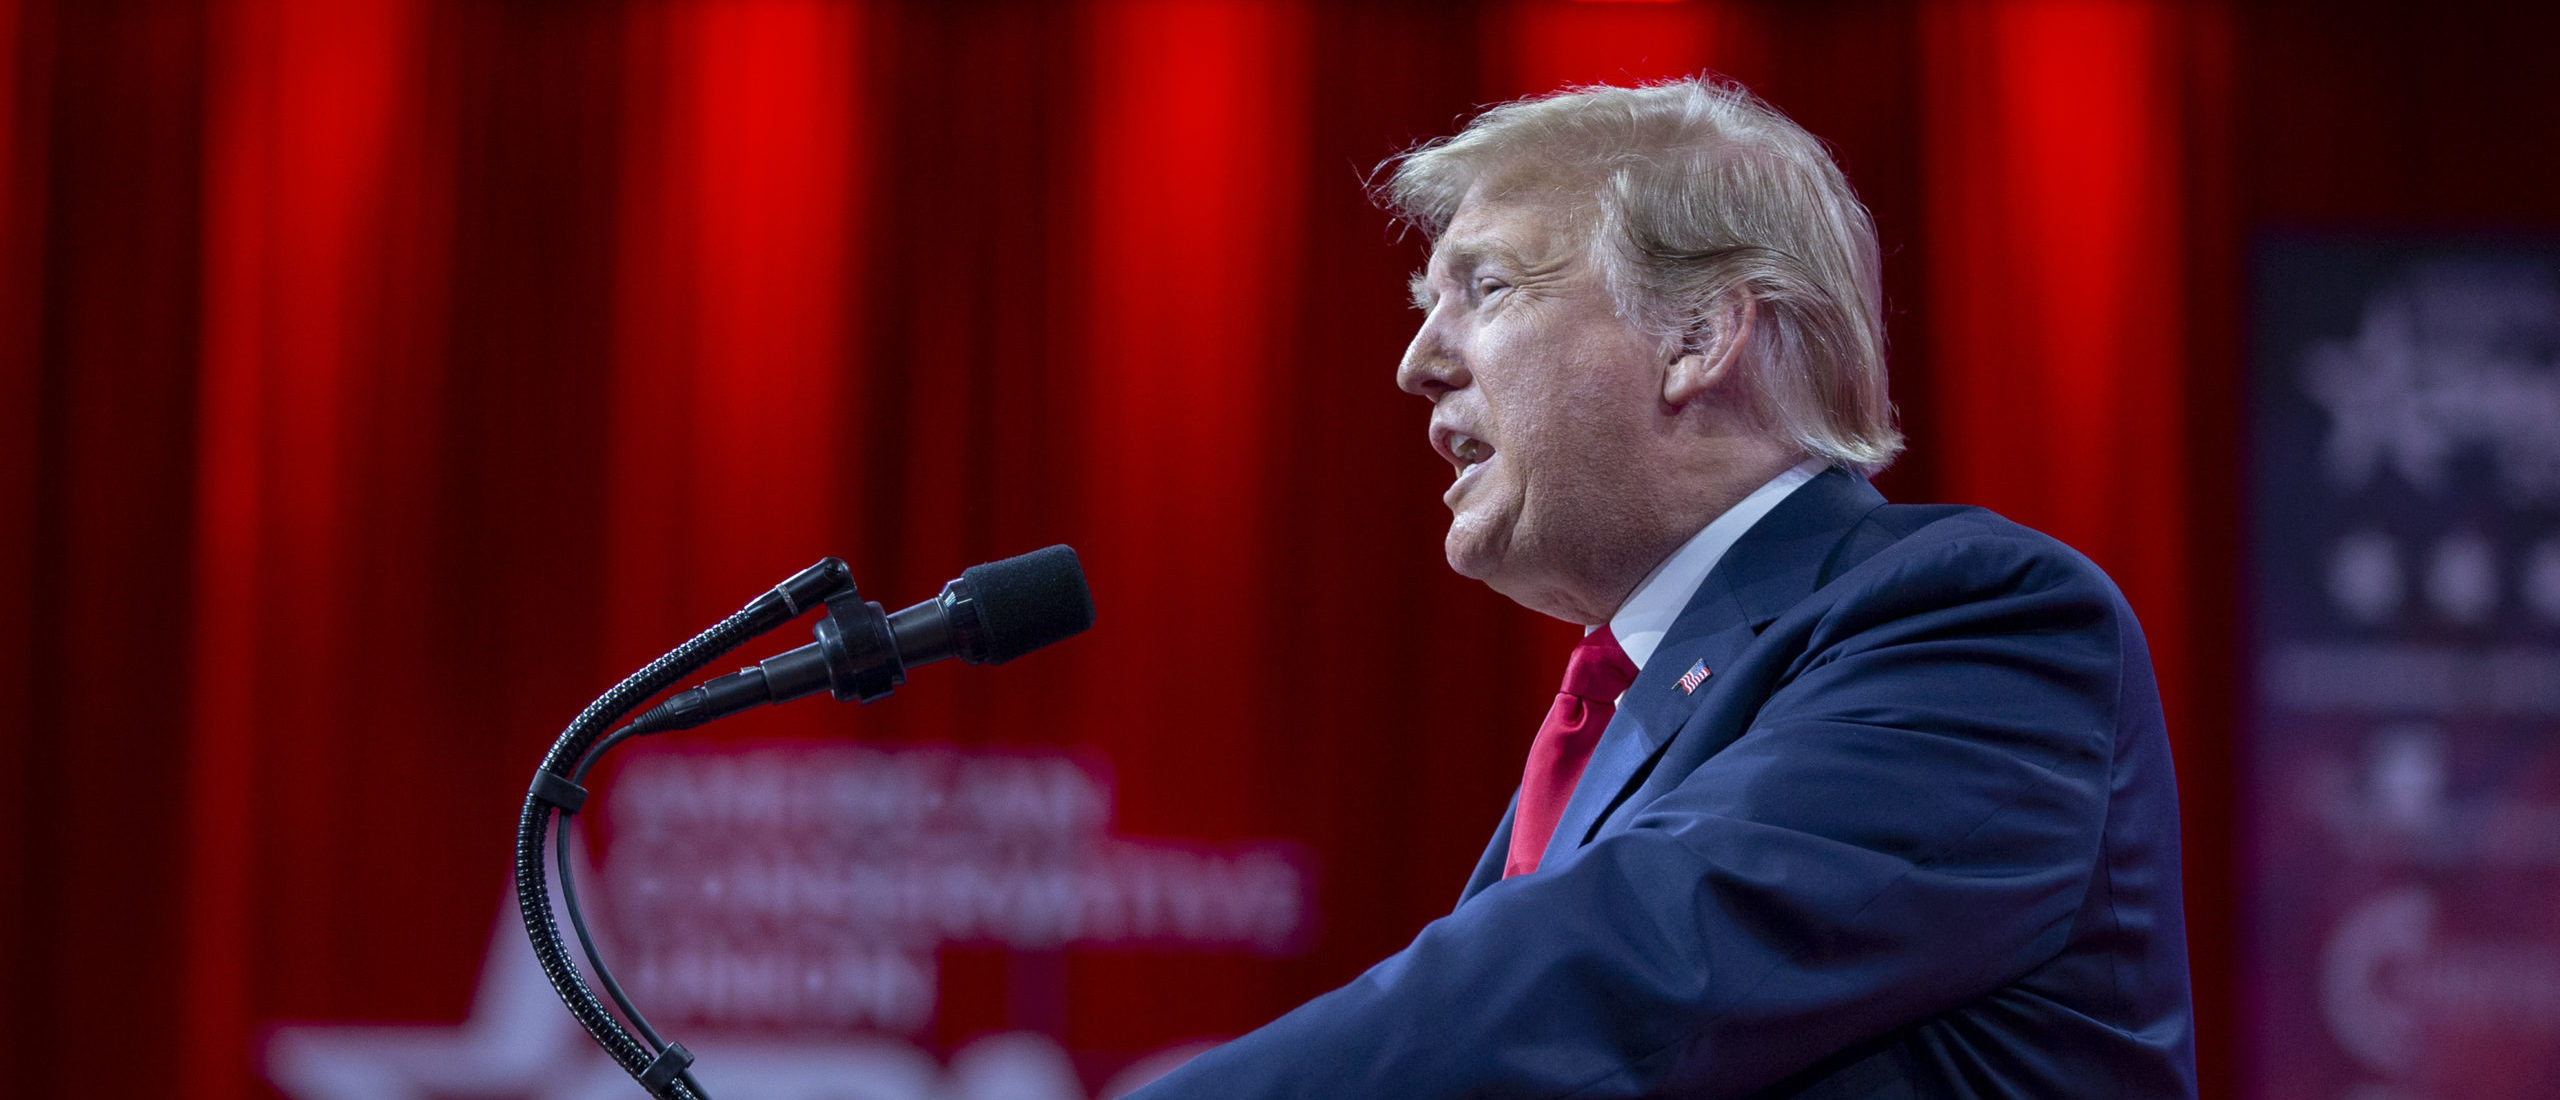 NATIONAL HARBOR, MD - MARCH 02: (AFP OUT) U.S. President Donald Trump speaks during CPAC 2019 on March 02, 2019 in National Harbor, Maryland. The American Conservative Union hosts the annual Conservative Political Action Conference to discuss conservative agenda. (Photo by Tasos Katopodis/Getty Images)